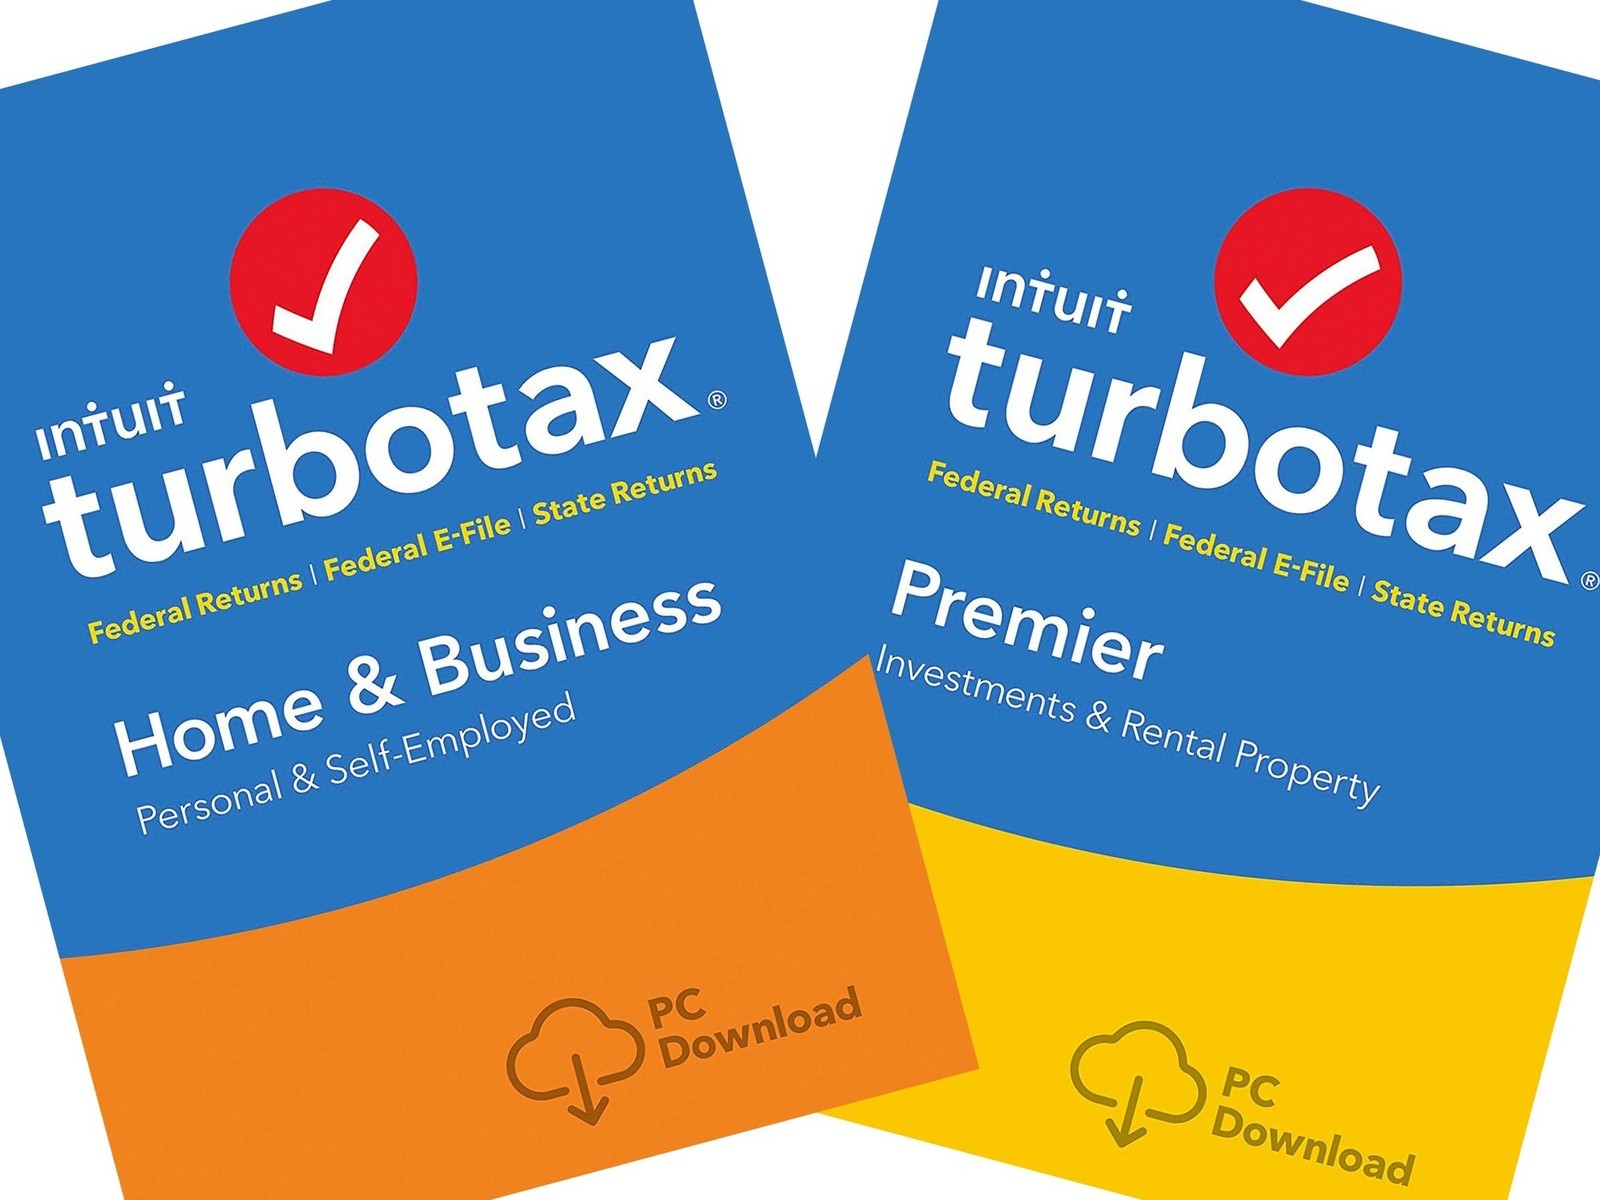 Turbotax Home And Business Software